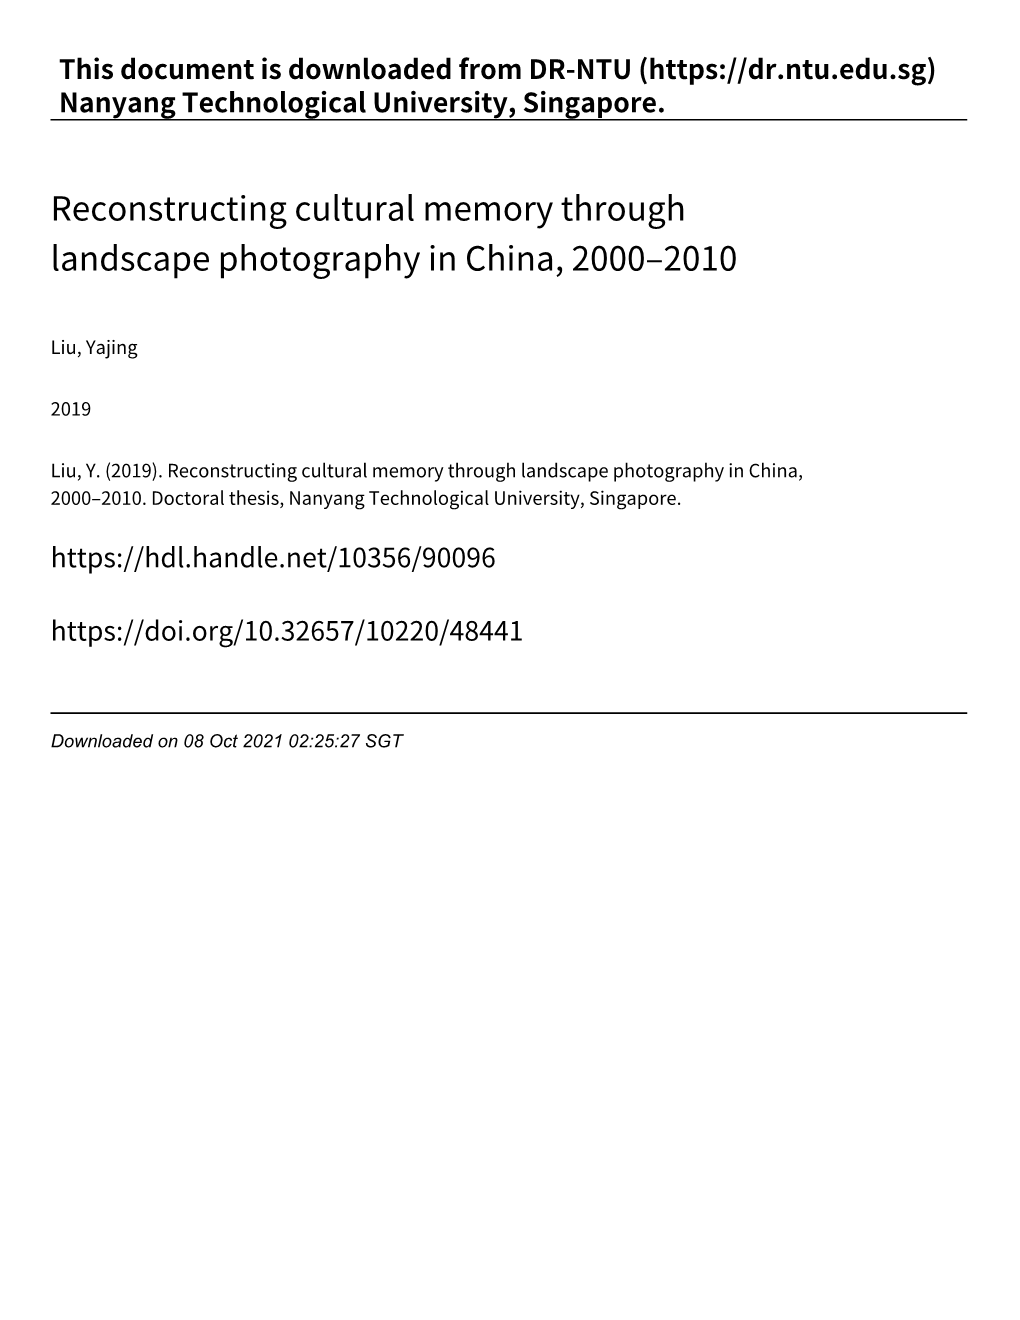 Reconstructing Cultural Memory Through Landscape Photography in China, 2000–2010